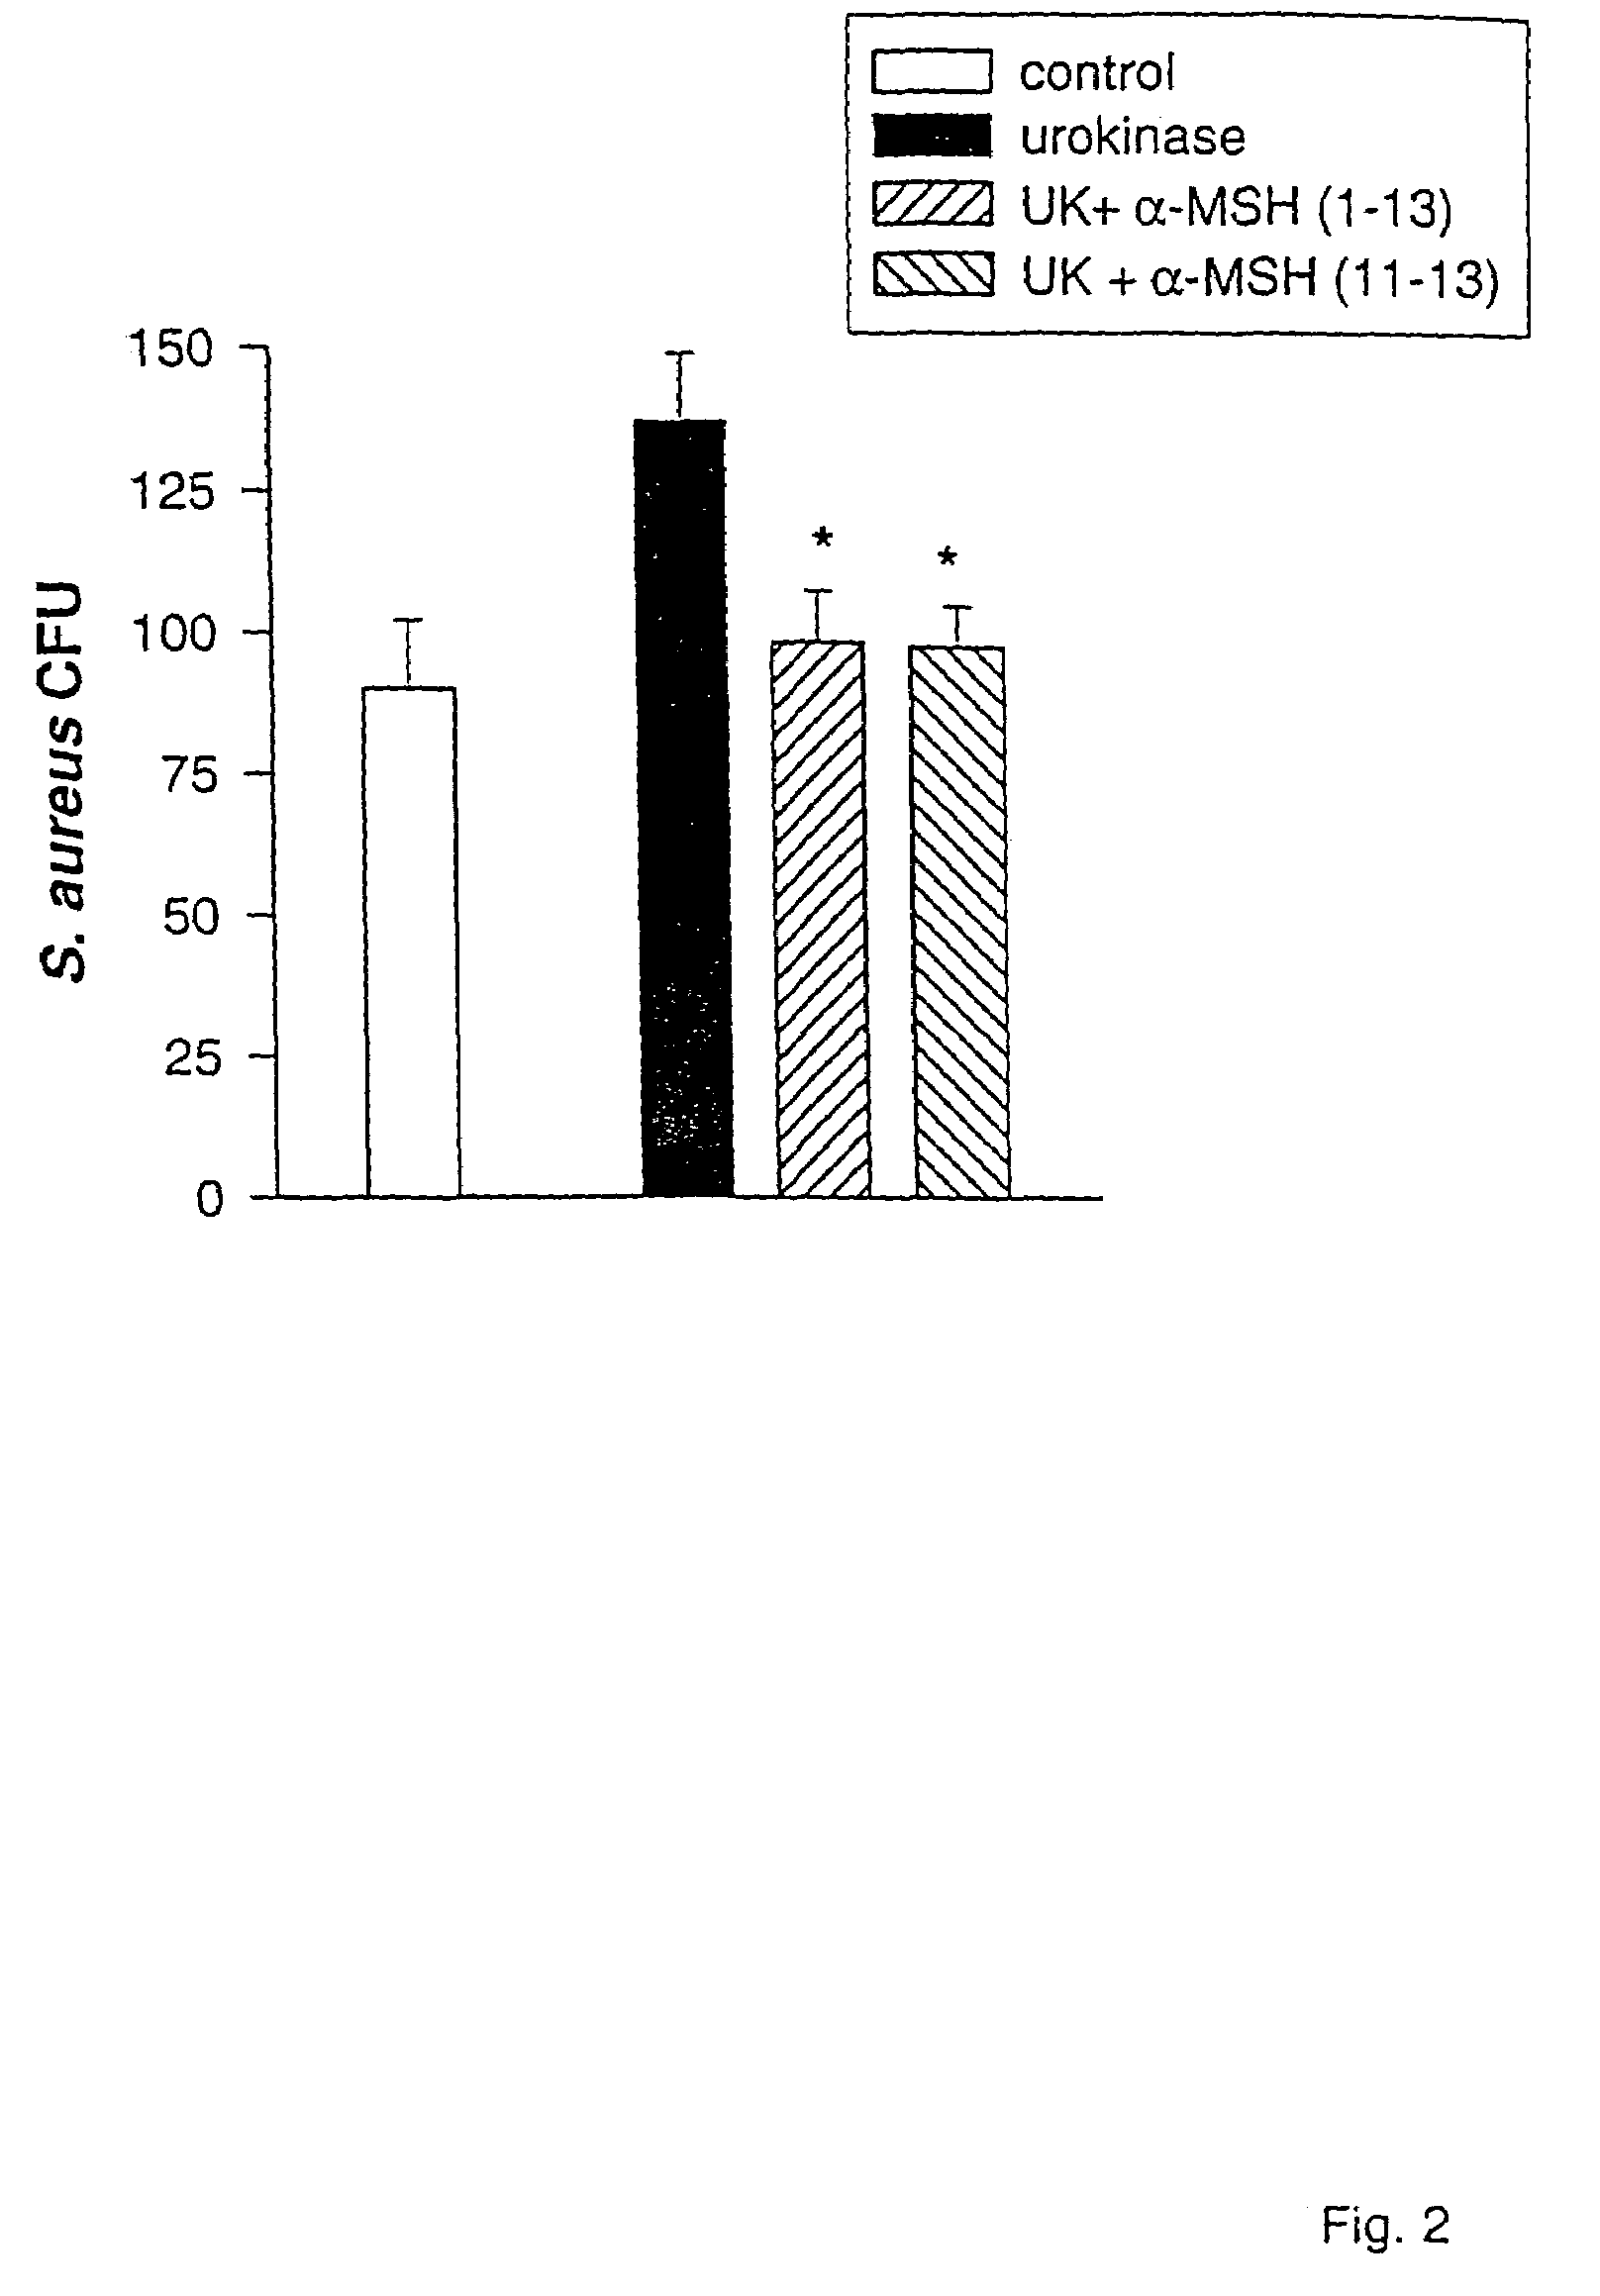 Composition and method of treatment for urogenital conditions